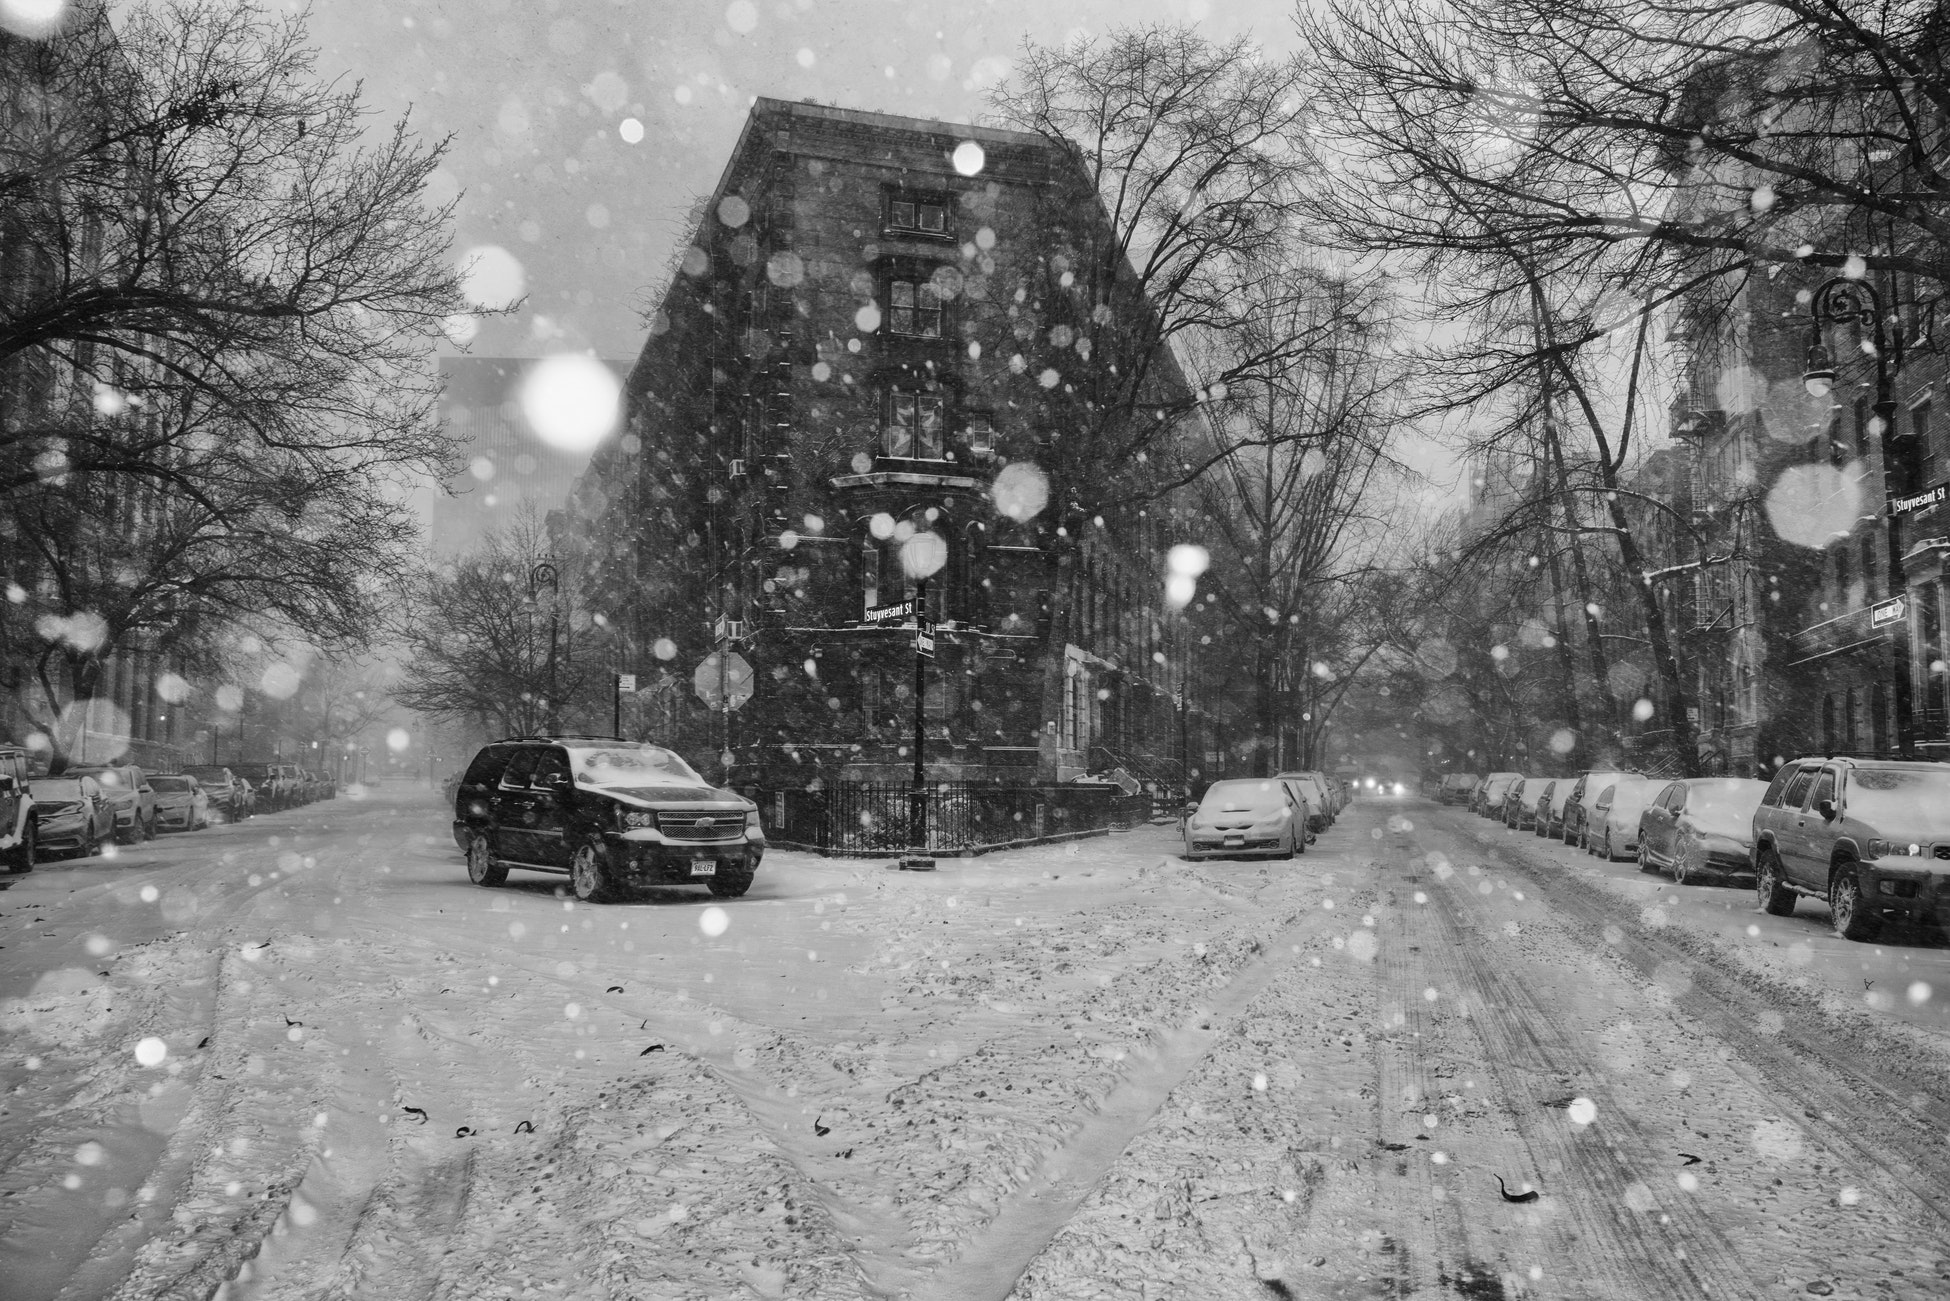 Black and white picture of a snowy street